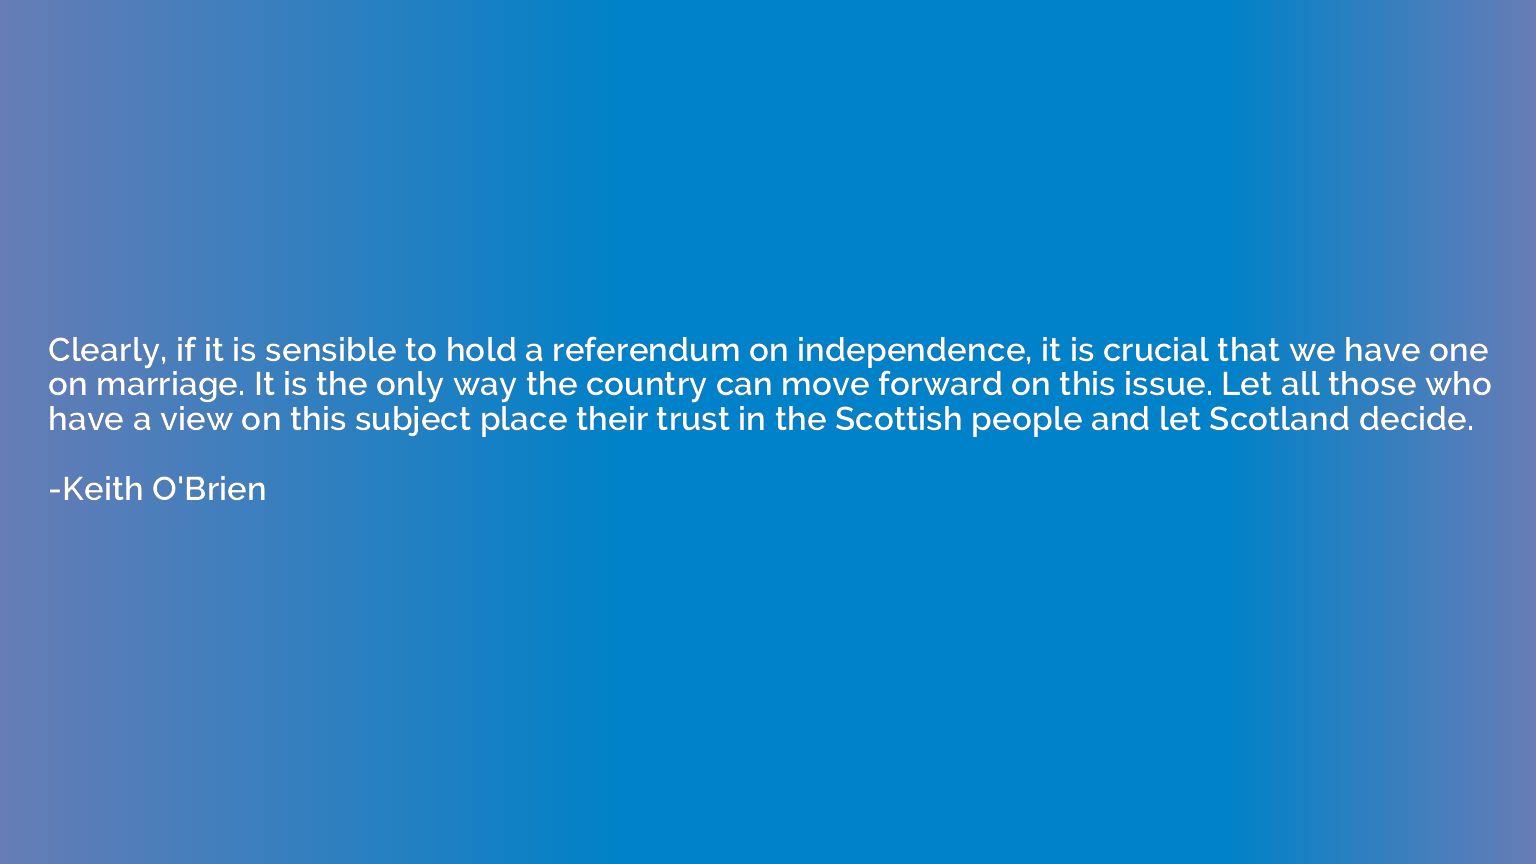 Clearly, if it is sensible to hold a referendum on independe